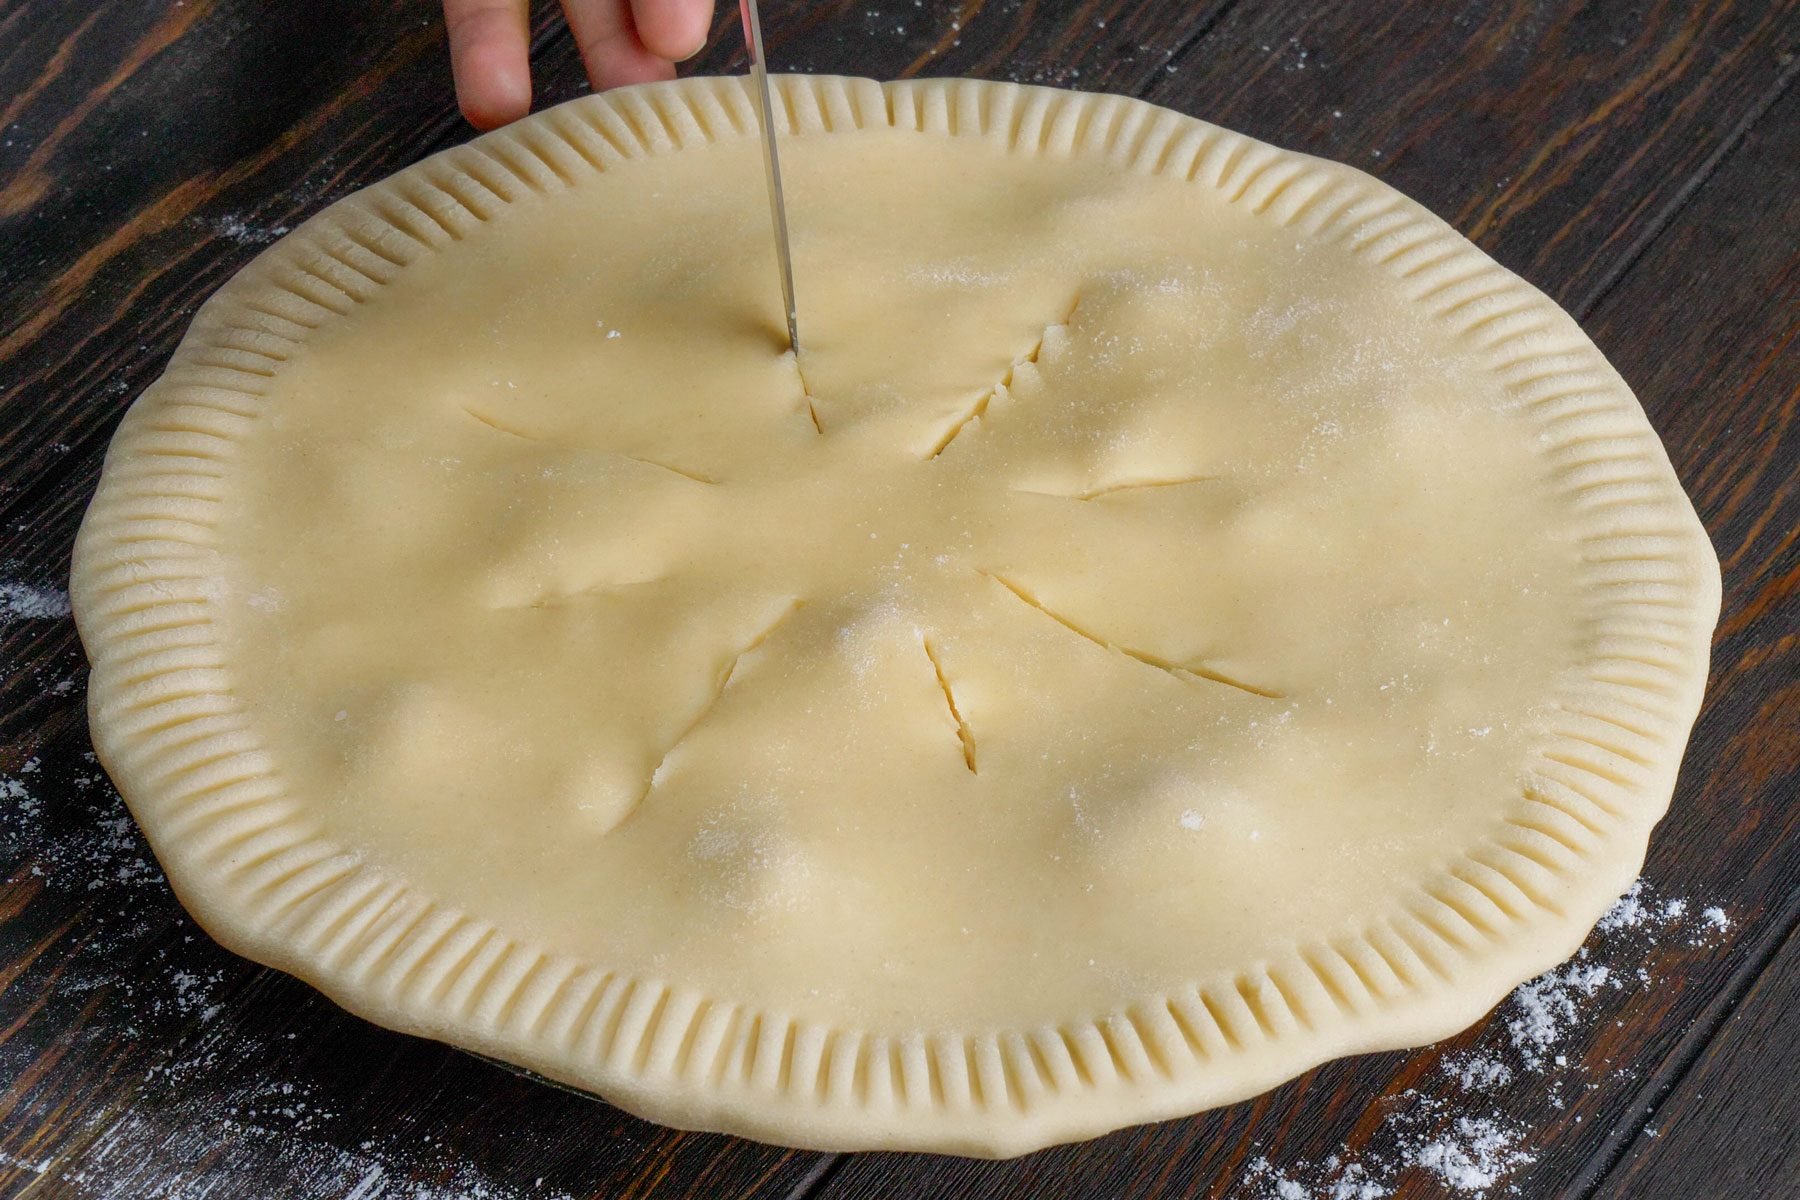 Cut slits in the center of the pie crust with a knife